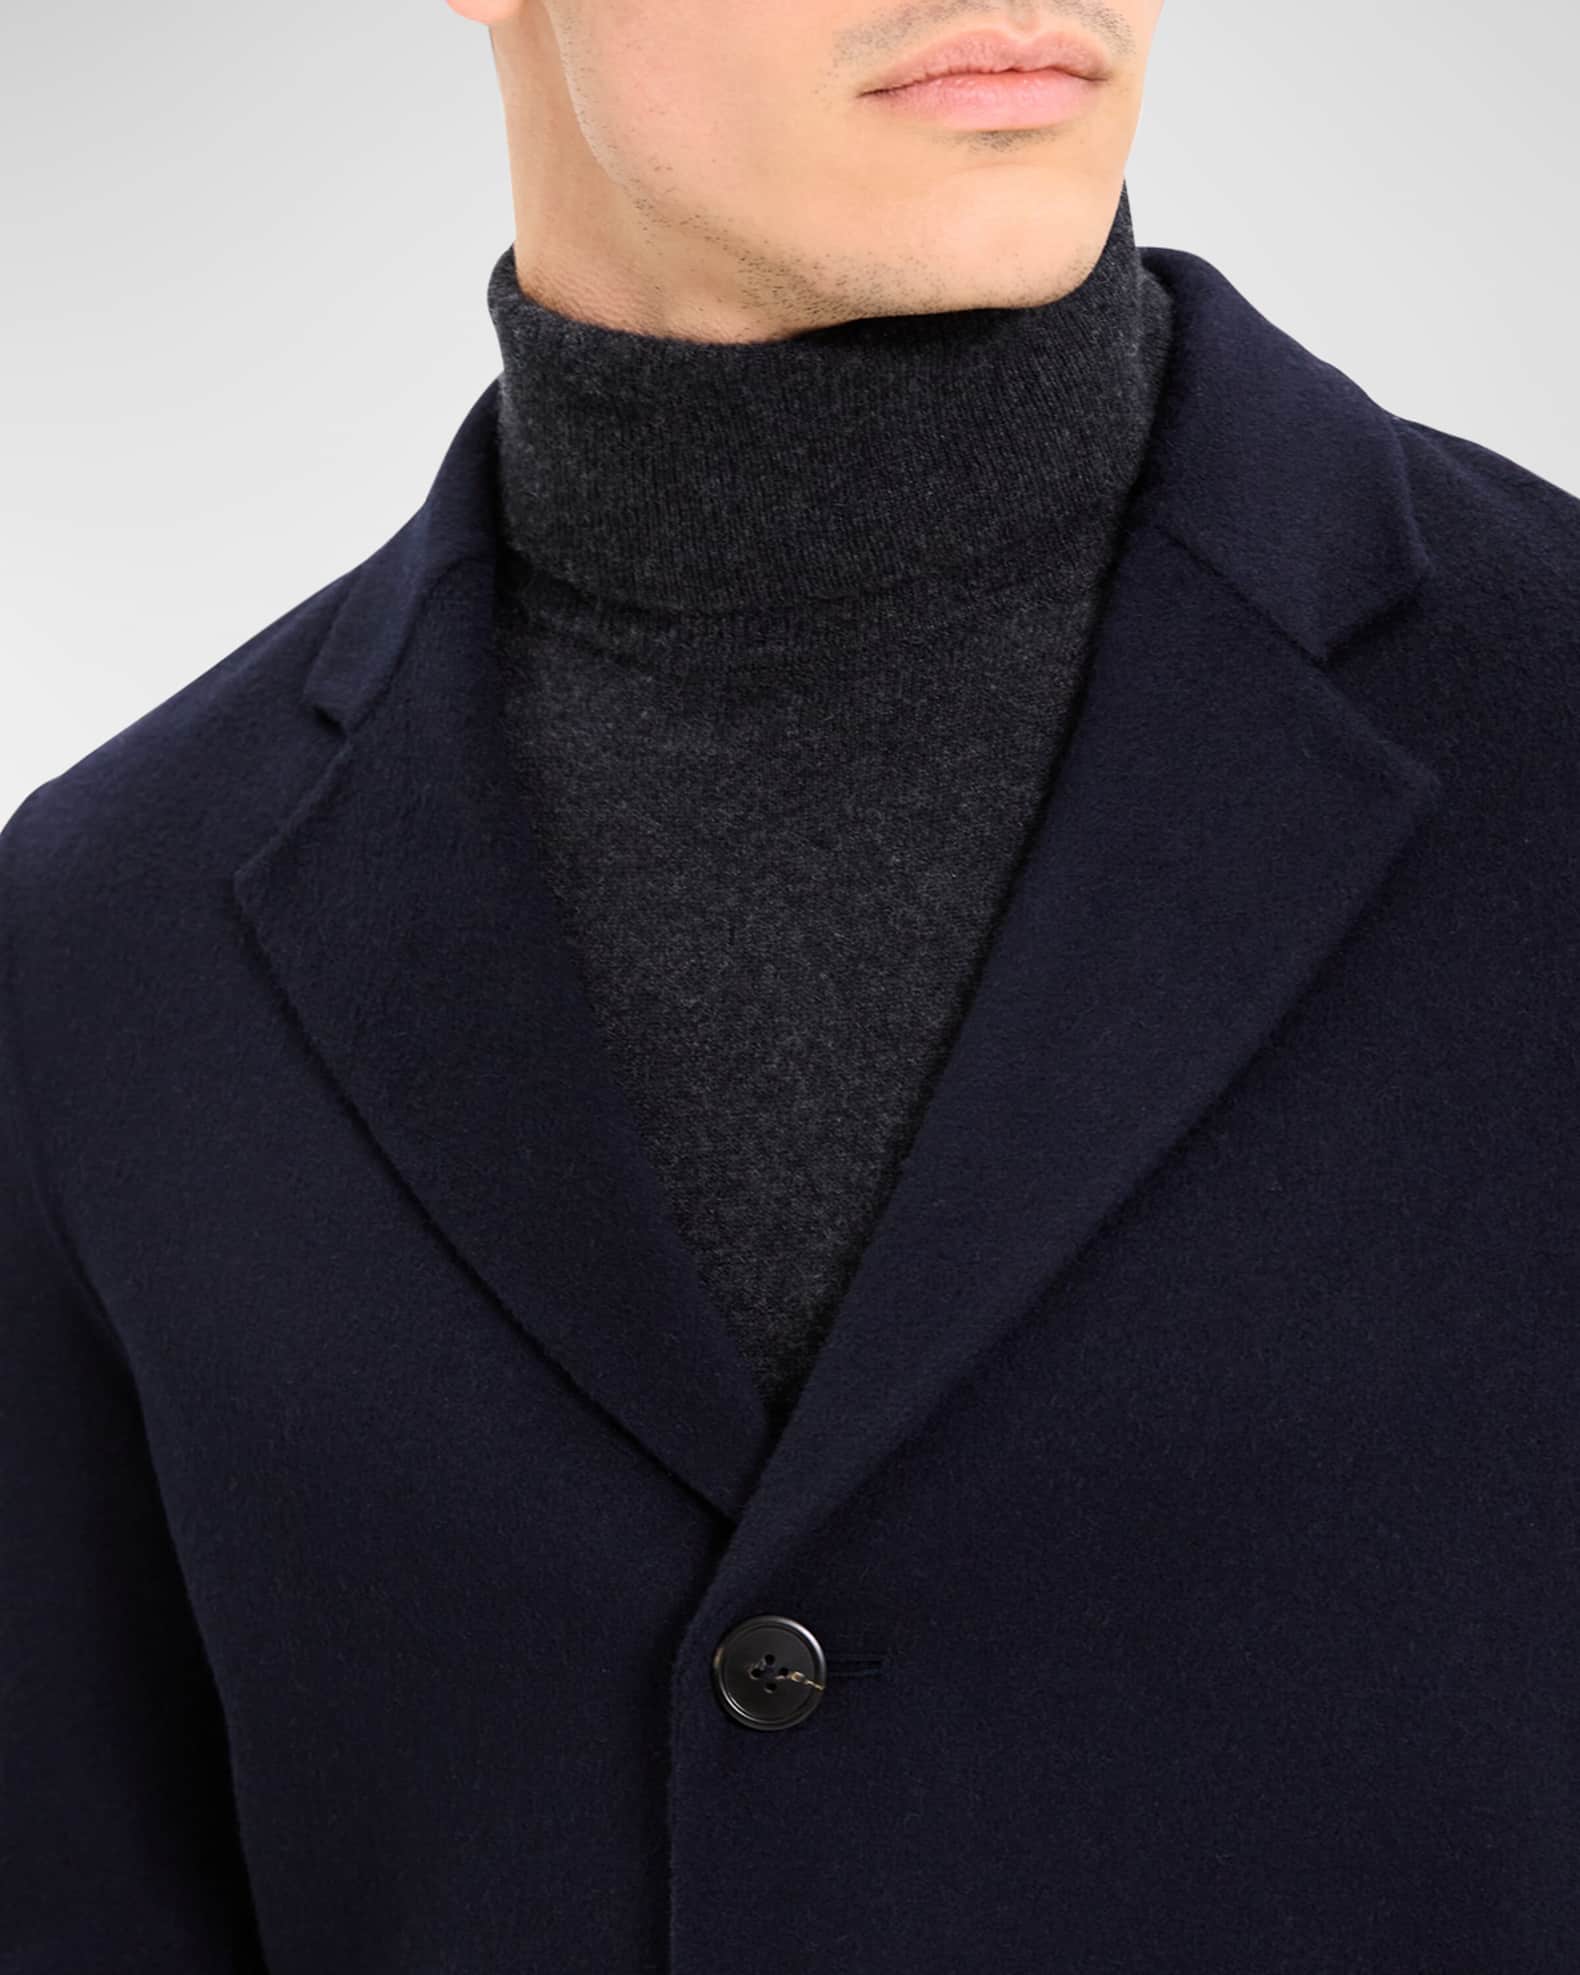 Theory Men's New Divide Wool-Cashmere Topcoat | Neiman Marcus